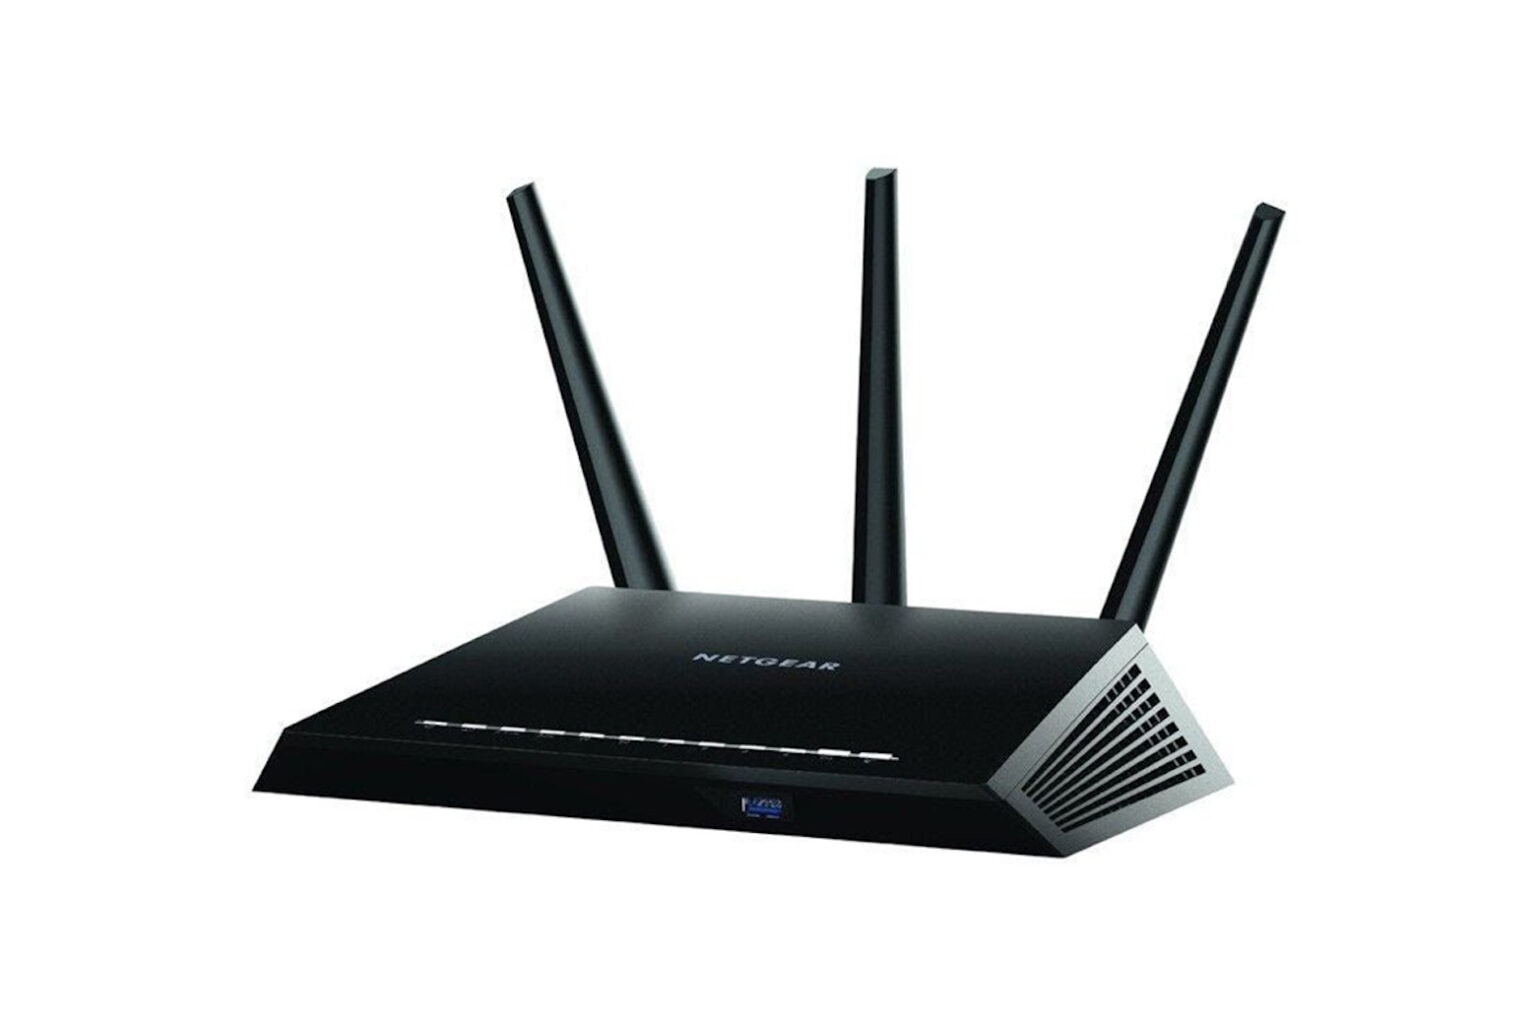 Grab 19% off this high-security router with privacy app today.